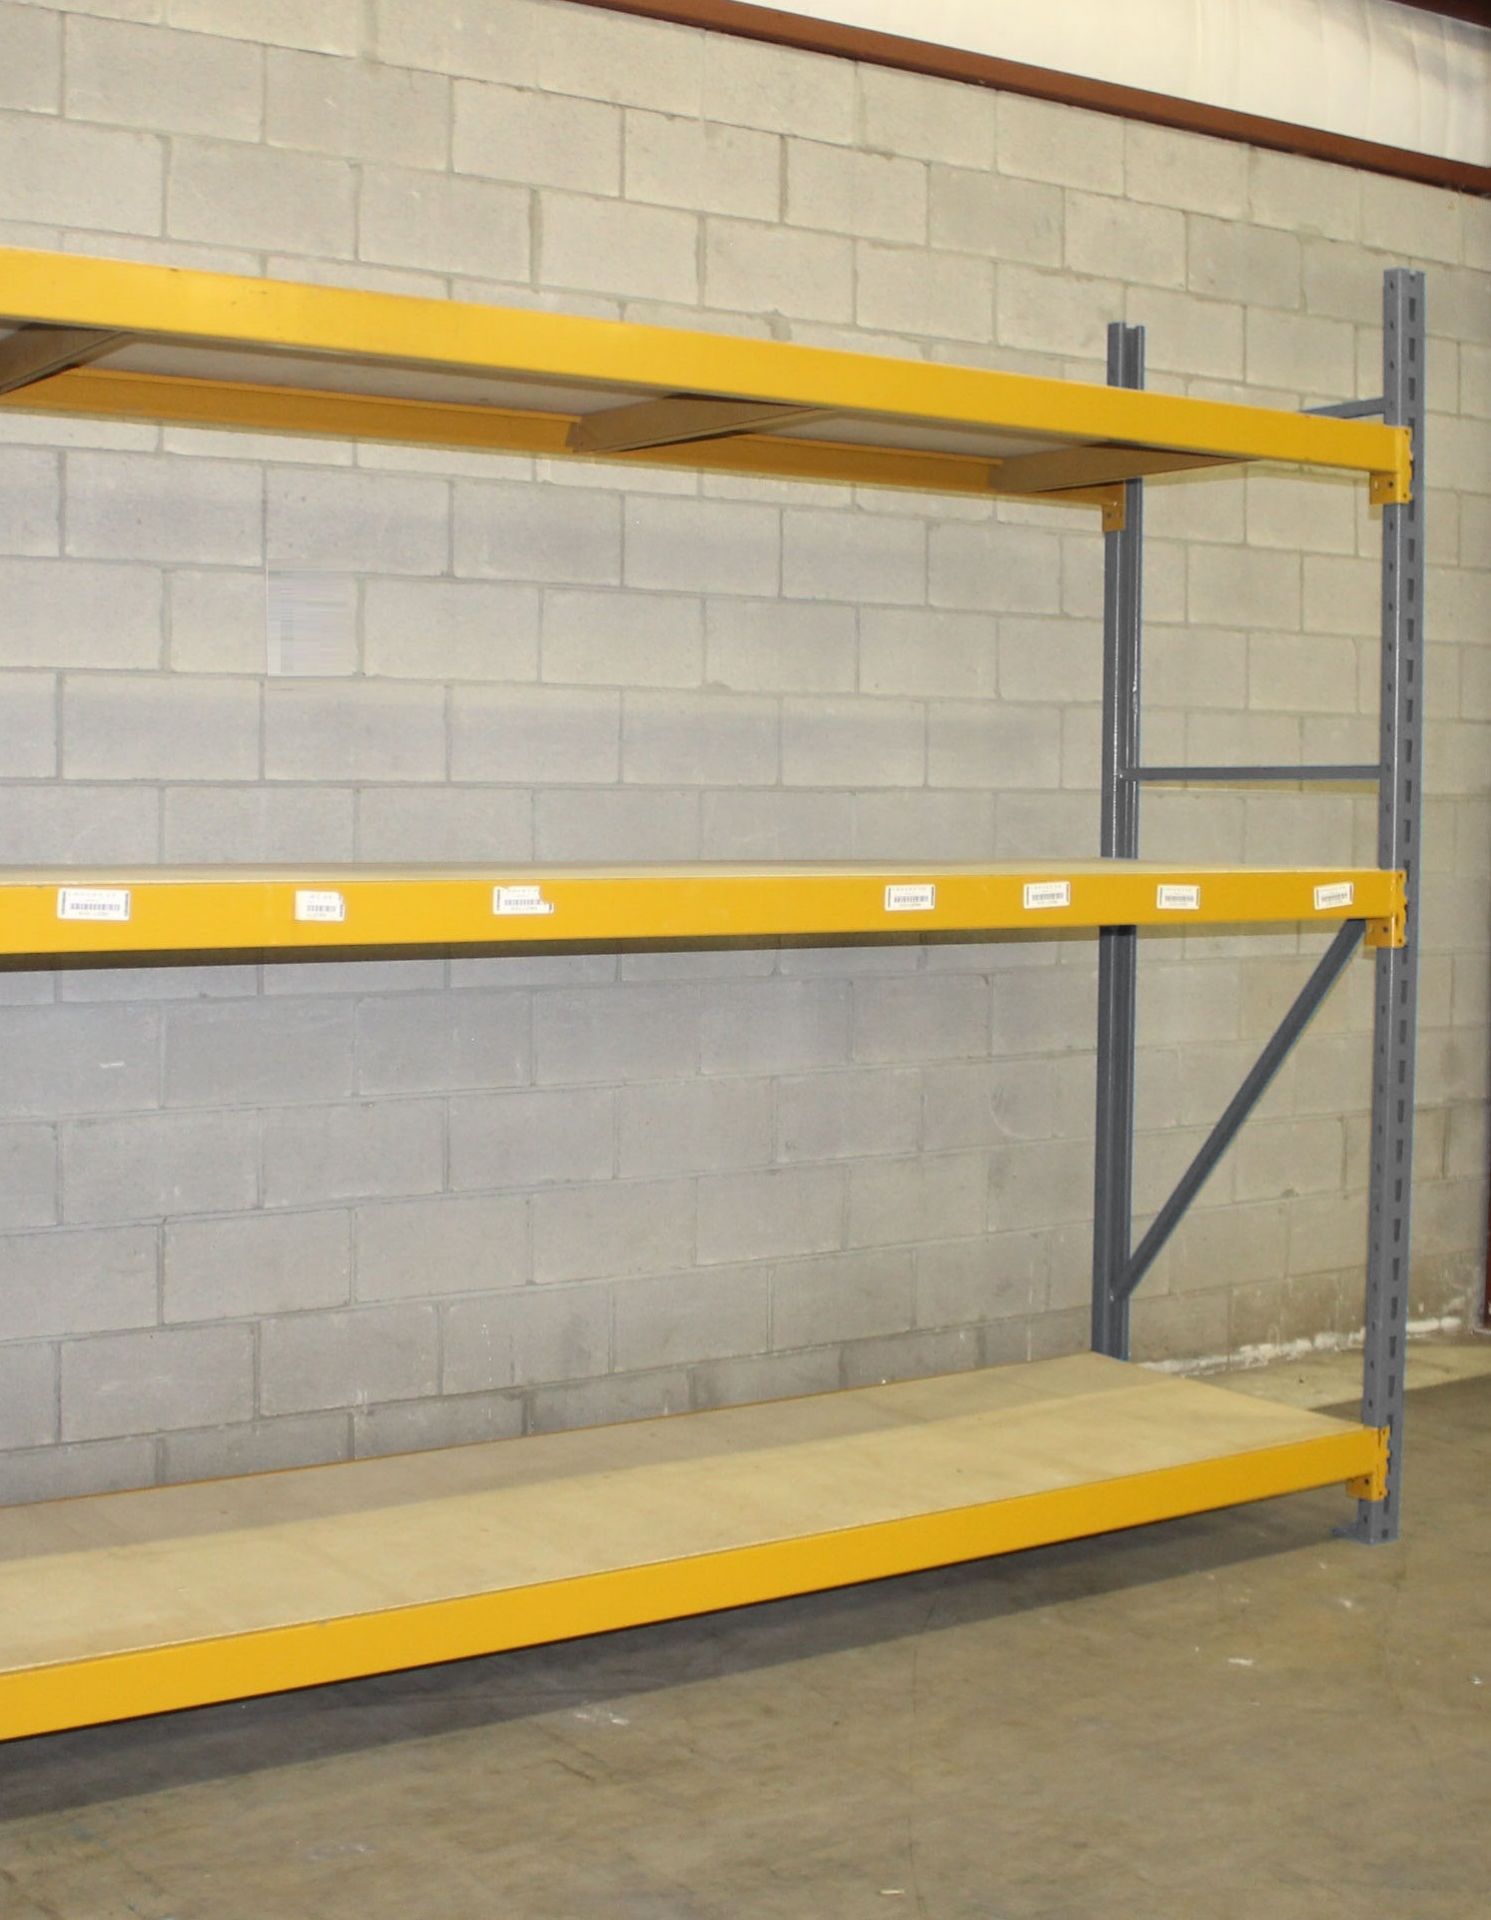 10 SECTIONS OF 96"H X 32"D X 108"L STOCK ROOM PALLET RACK SHELVING,  TOTAL 10 SECTIONS, 1 ROWS - Image 3 of 5